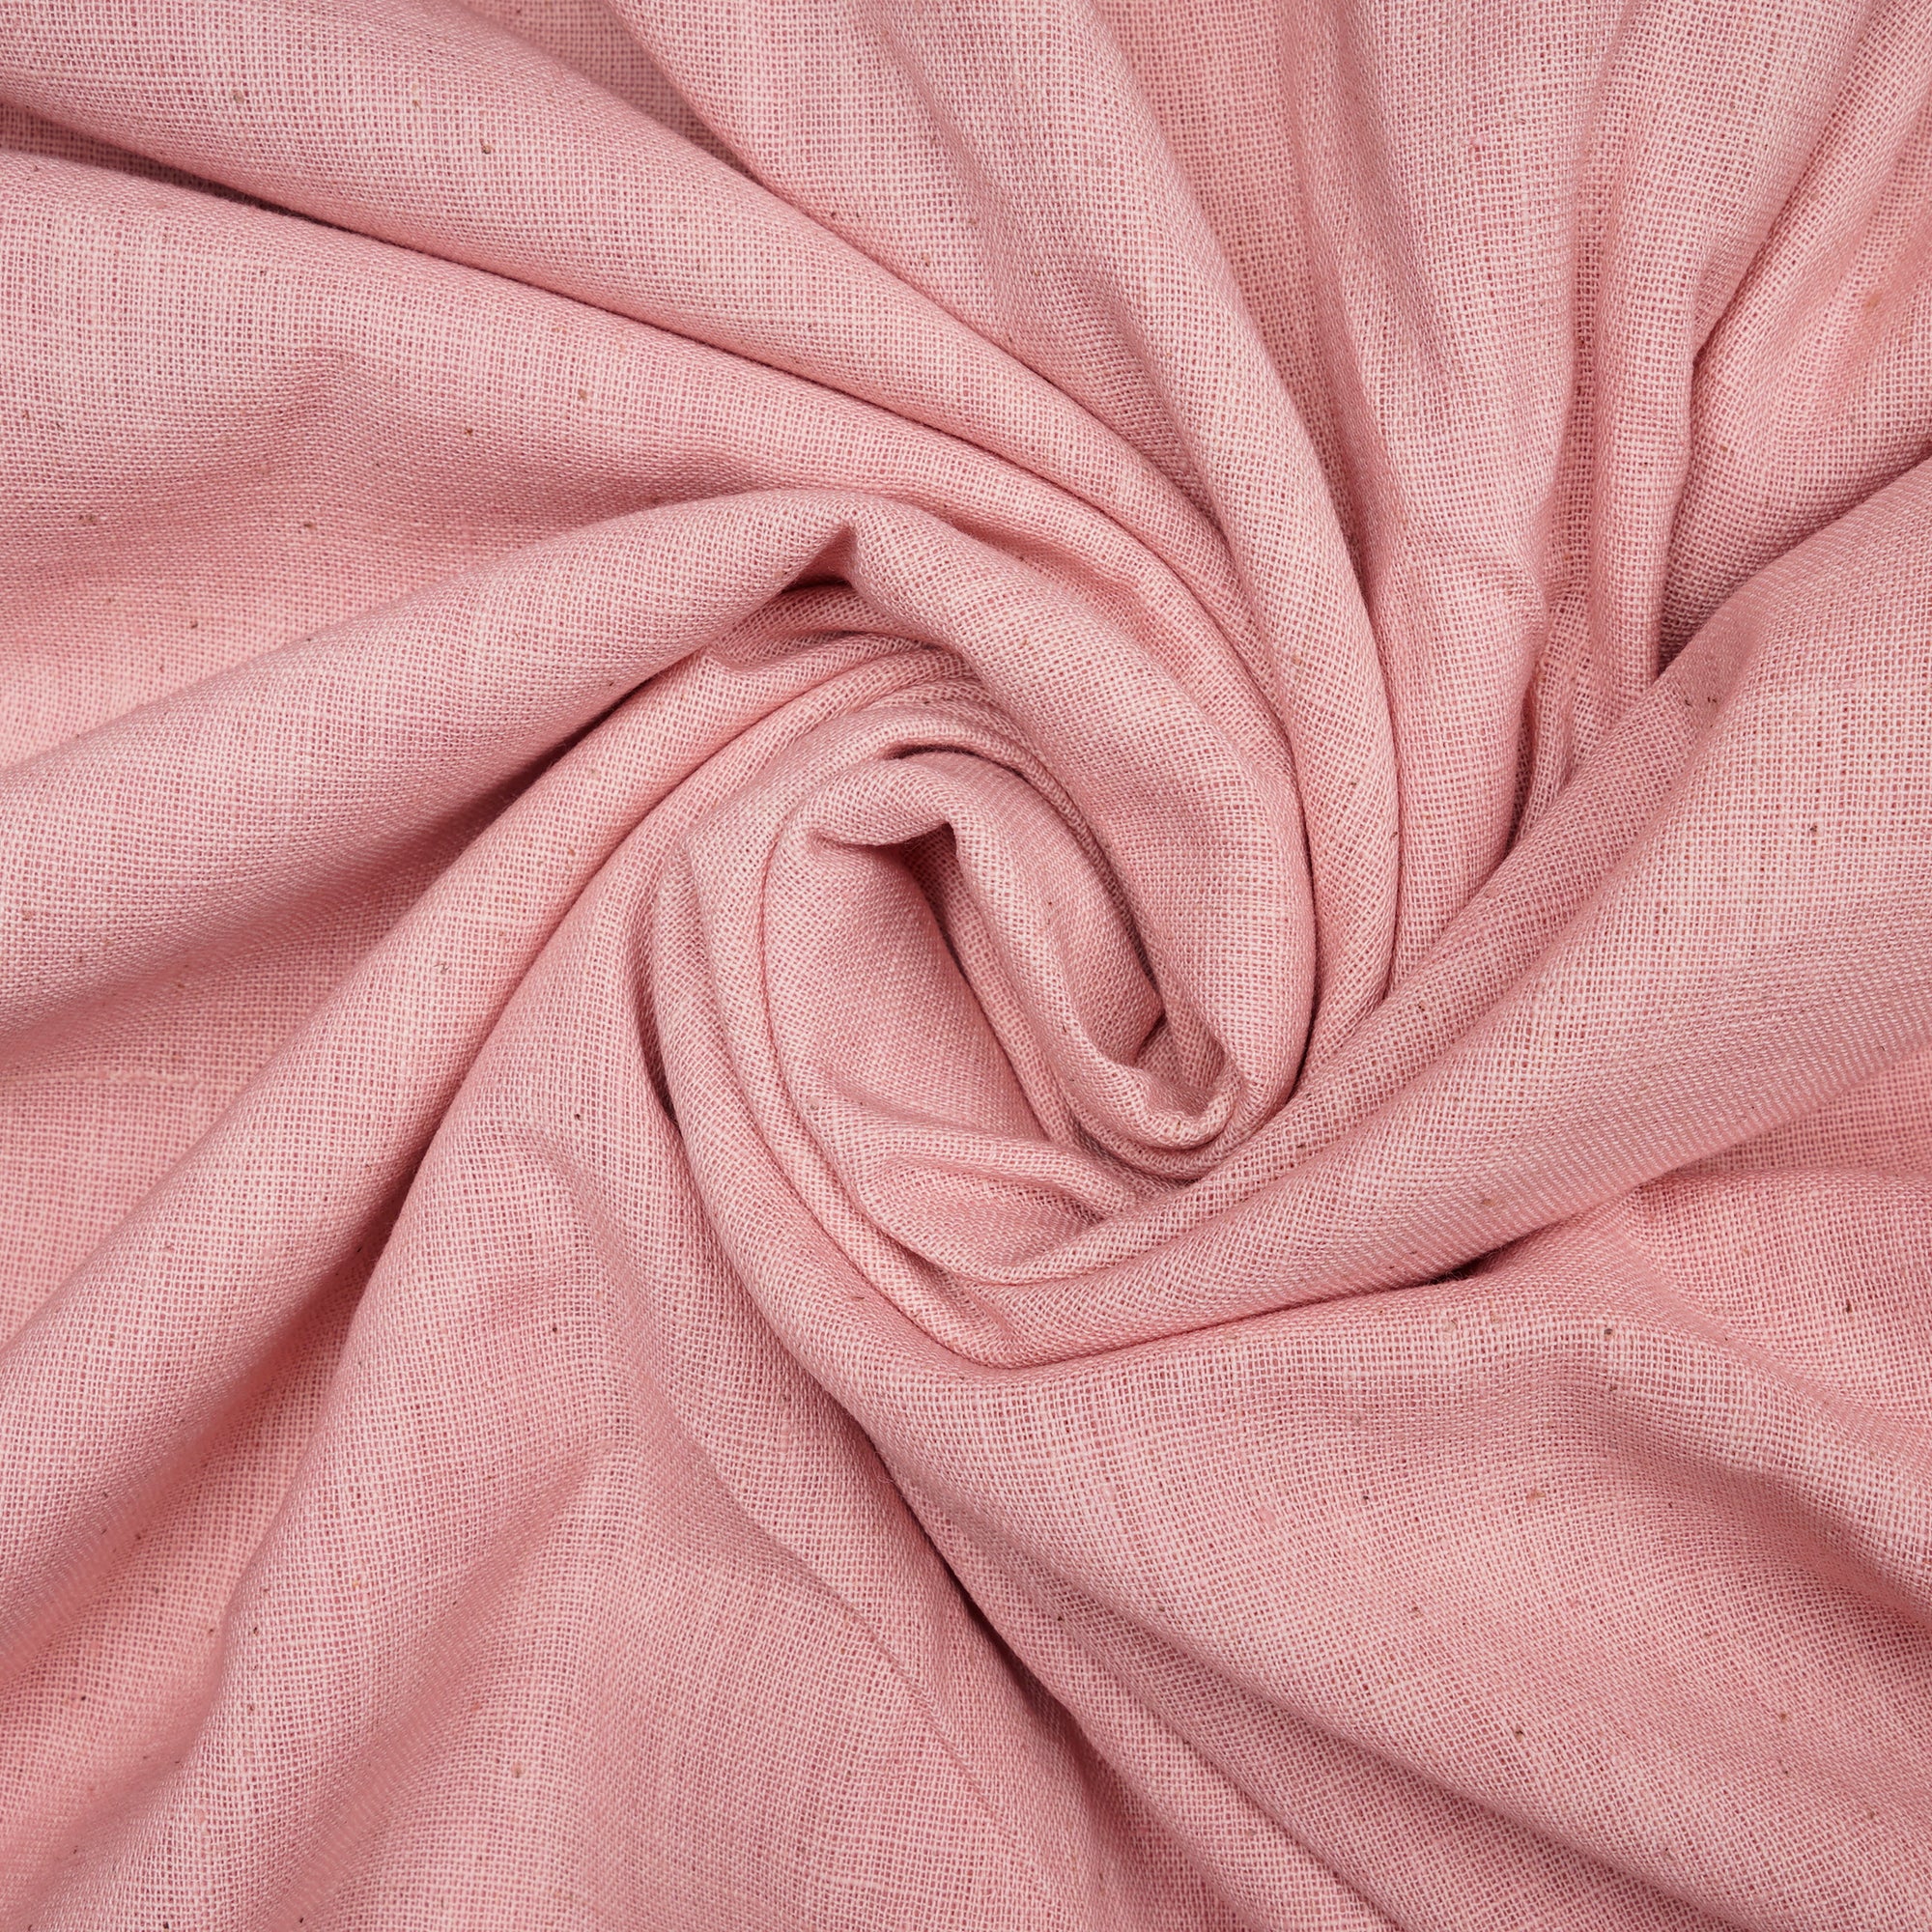 English Rose 40's Count Piece Dyed Handspun Handwoven Cotton Fabric